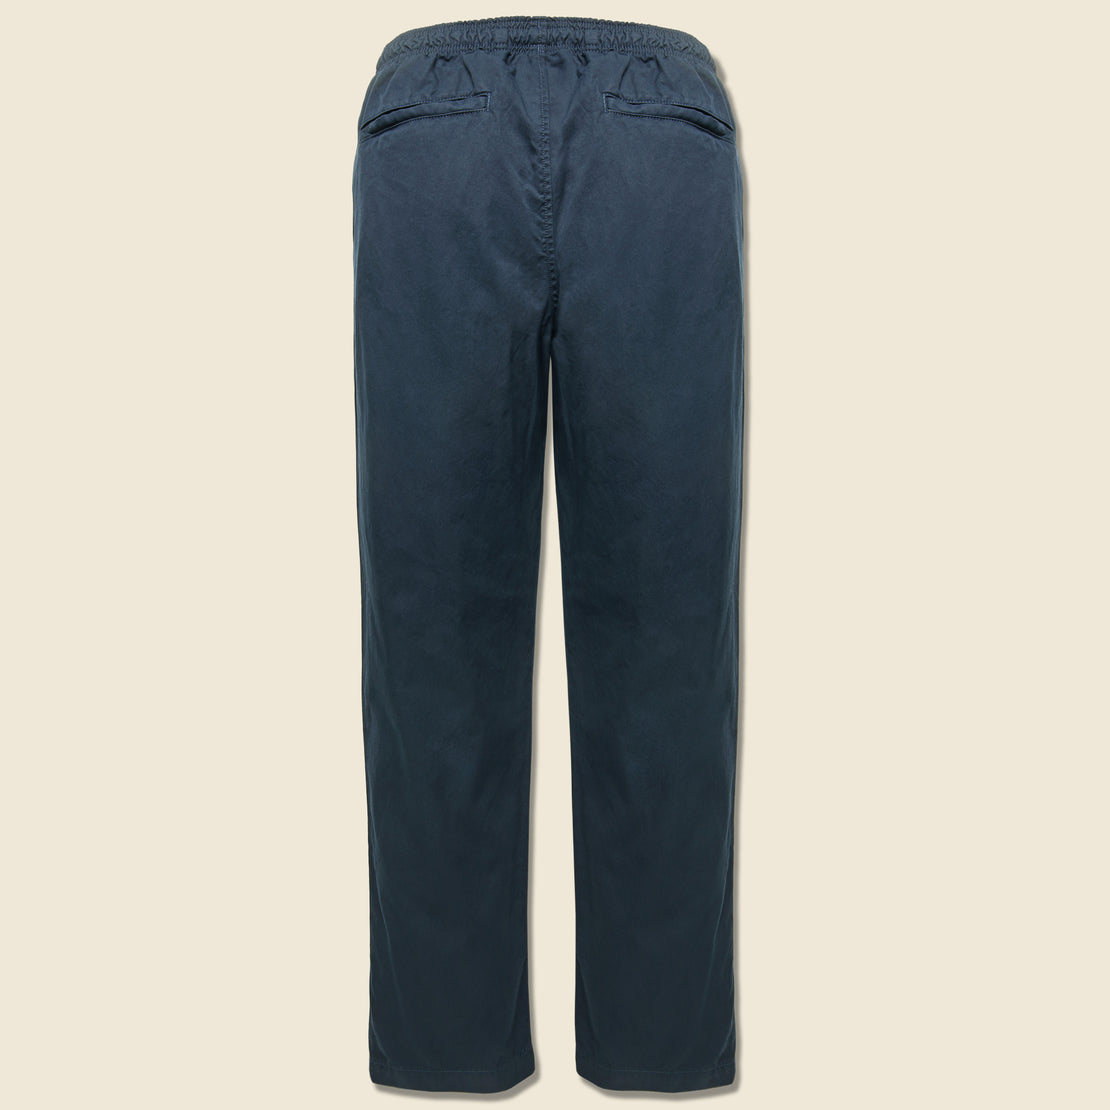 Light Twill Easy Chino - Navy - Save Khaki - STAG Provisions - Pants - Twill